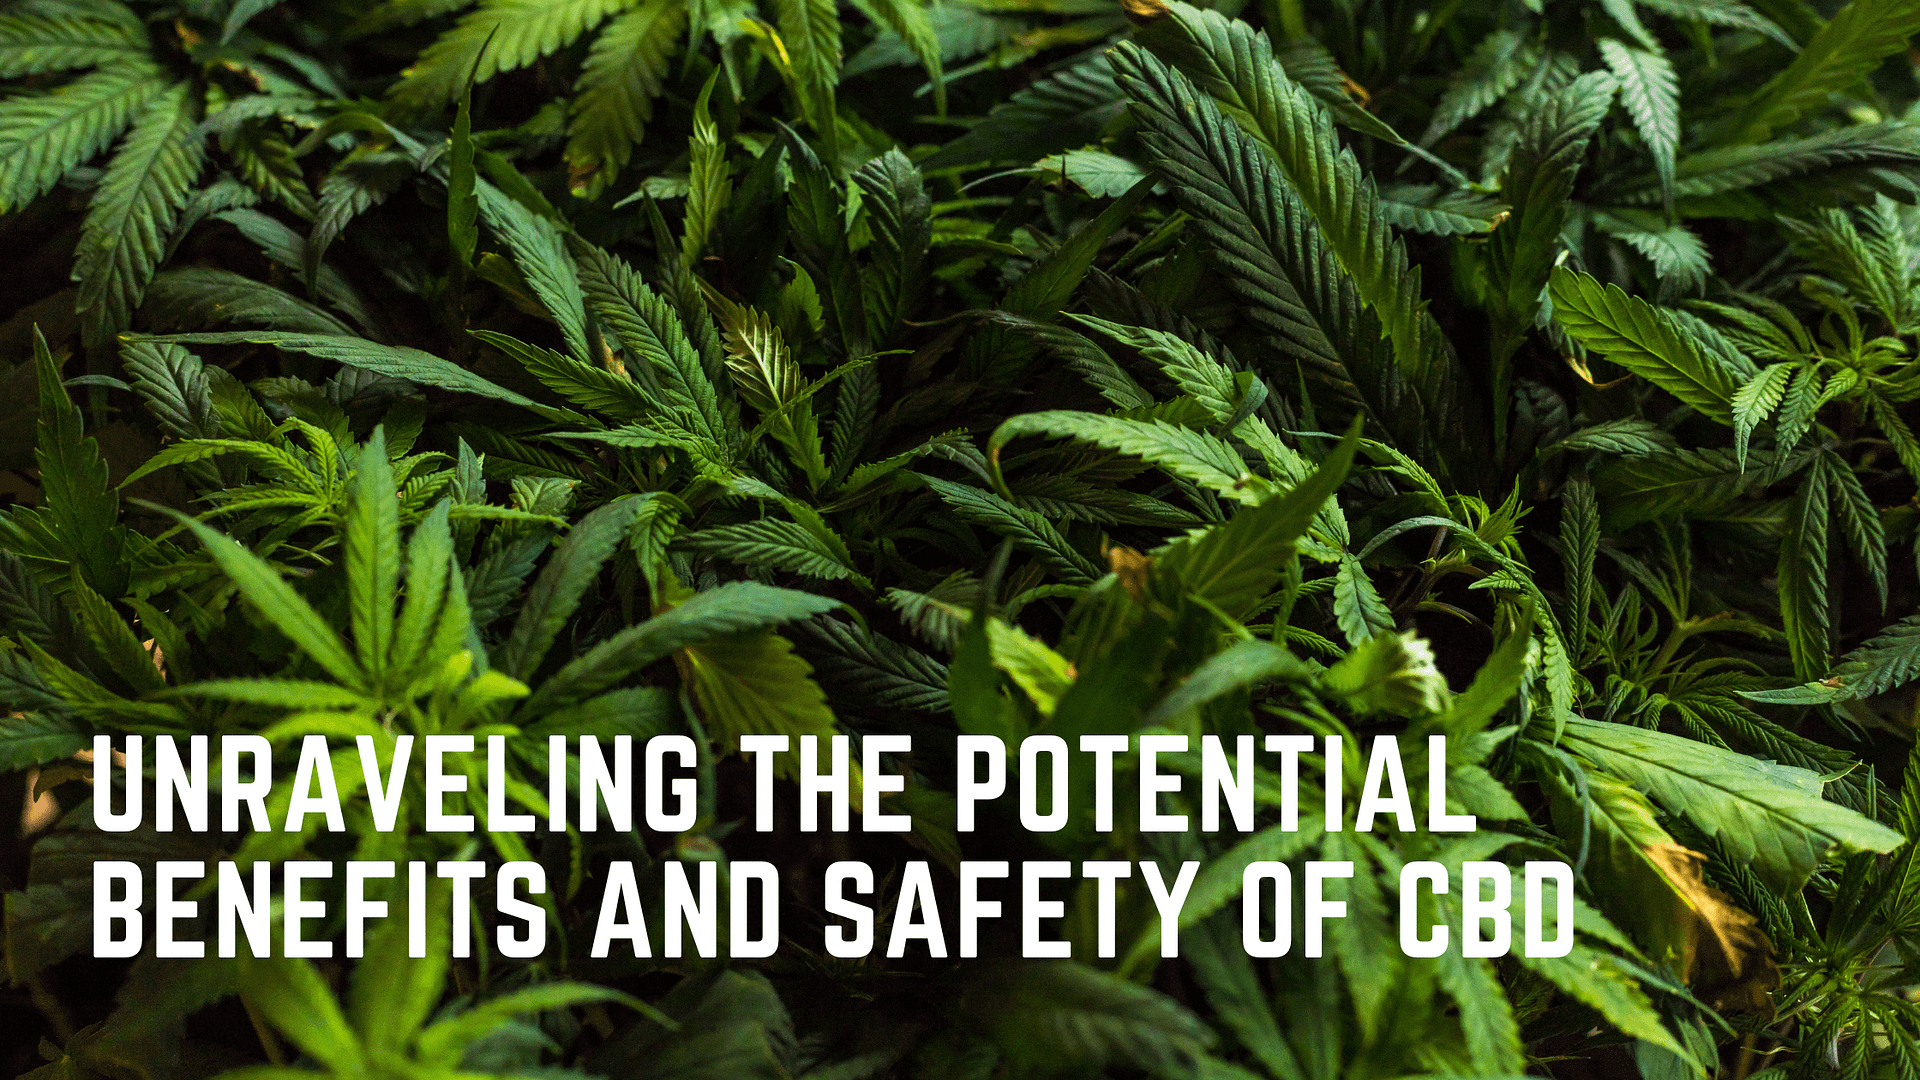 Benefits and Safety of CBD